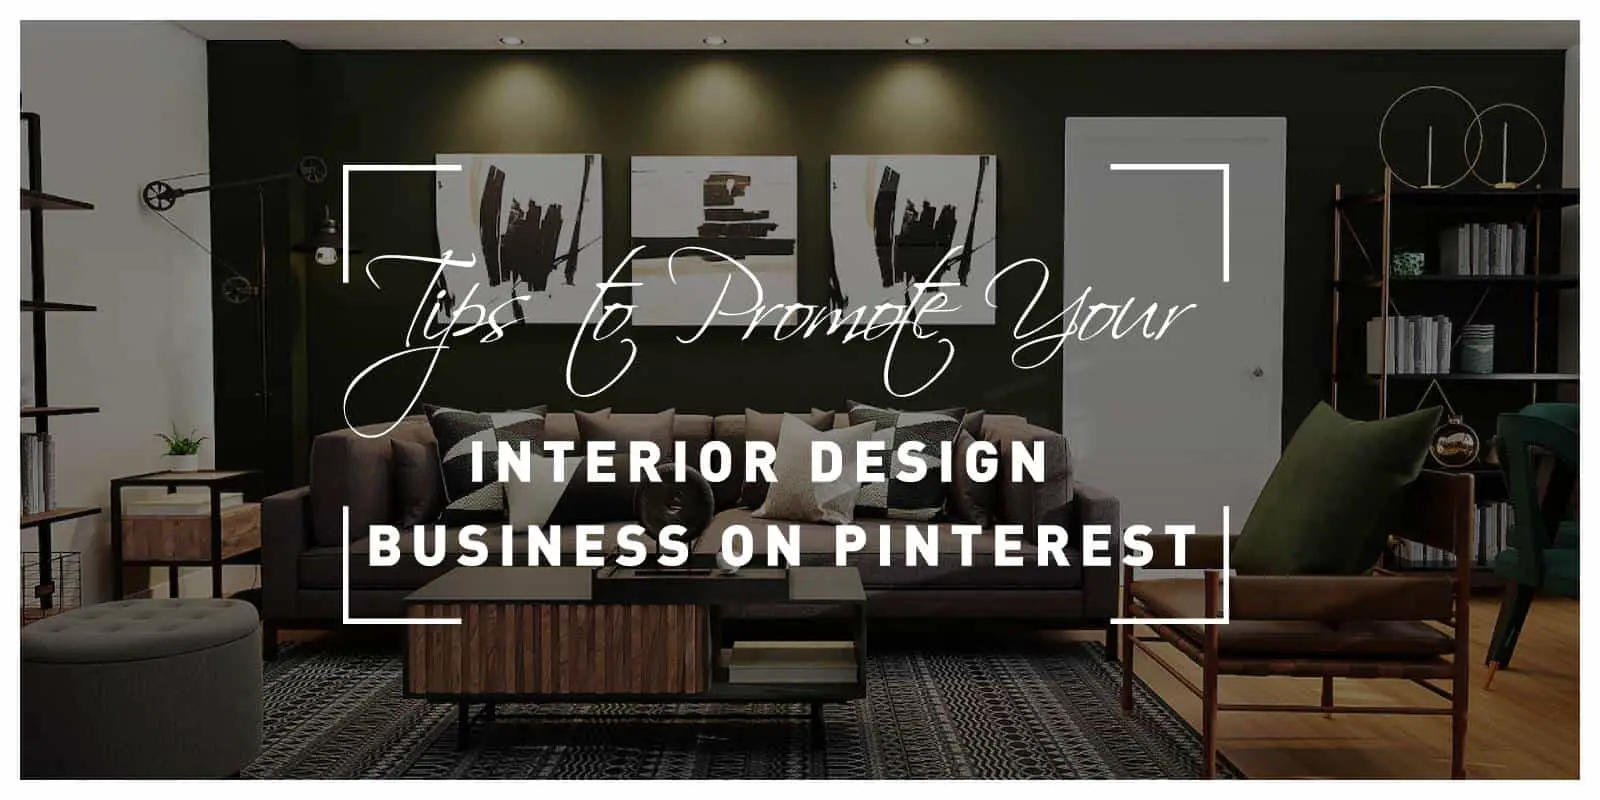 Six Marketing Tips to Promote Your Interior Design Business on Pinterest